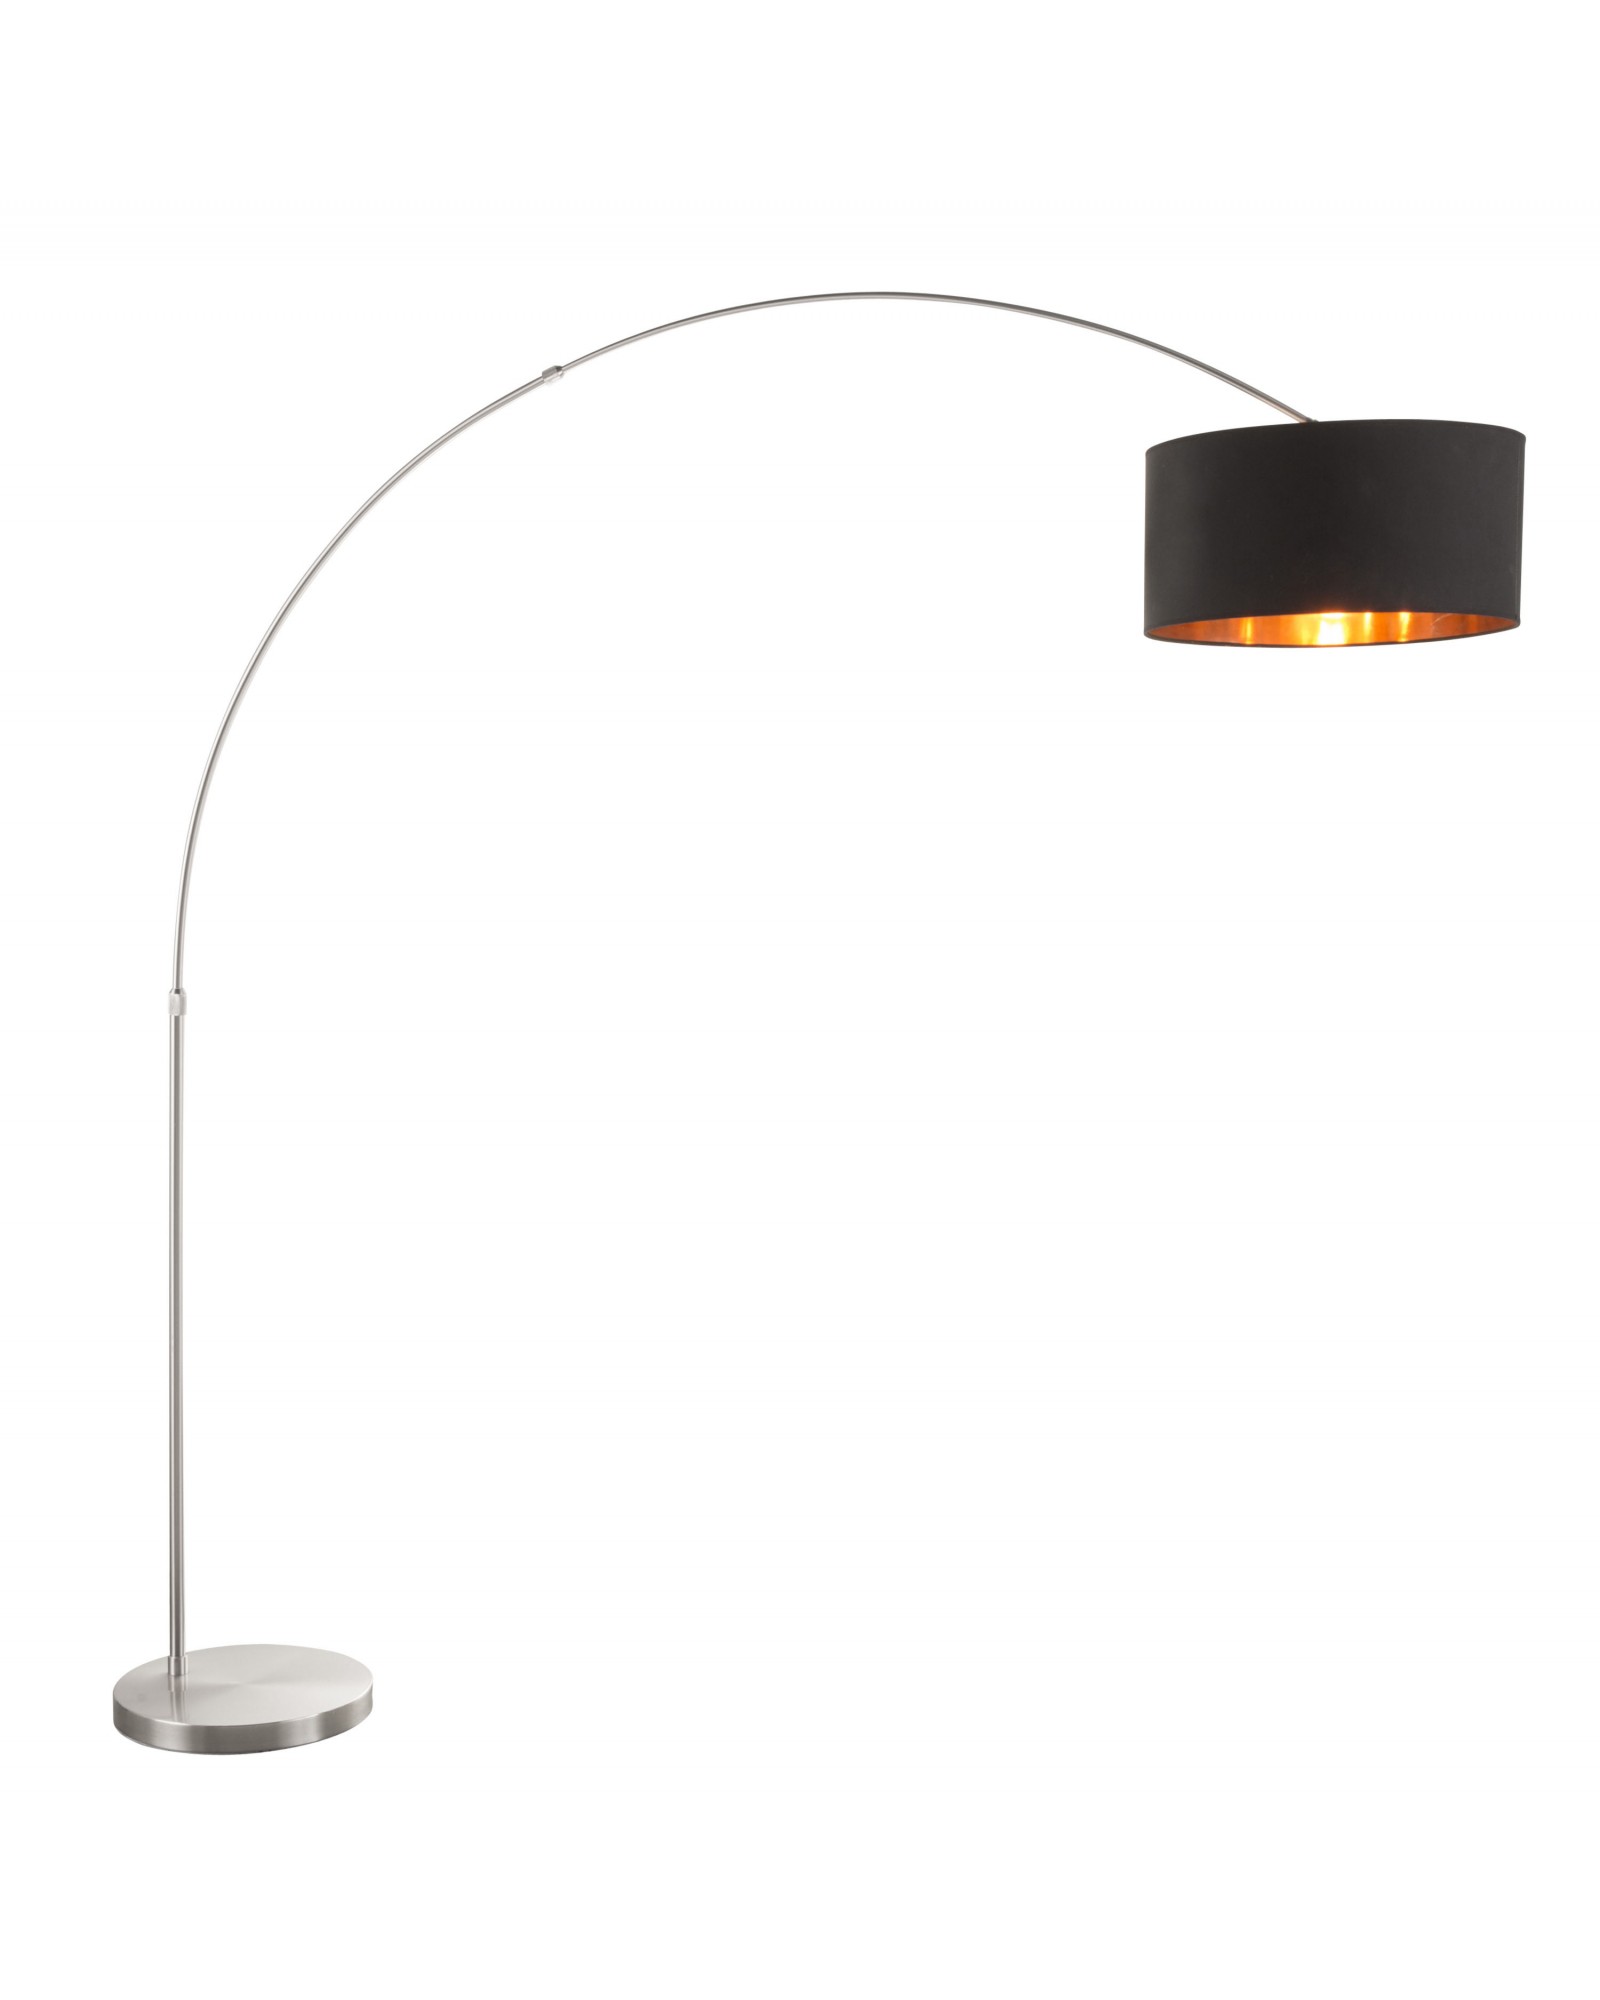 Salon Contemporary Floor Lamp with Satin Nickel Base and Black Shade with Copper Accent